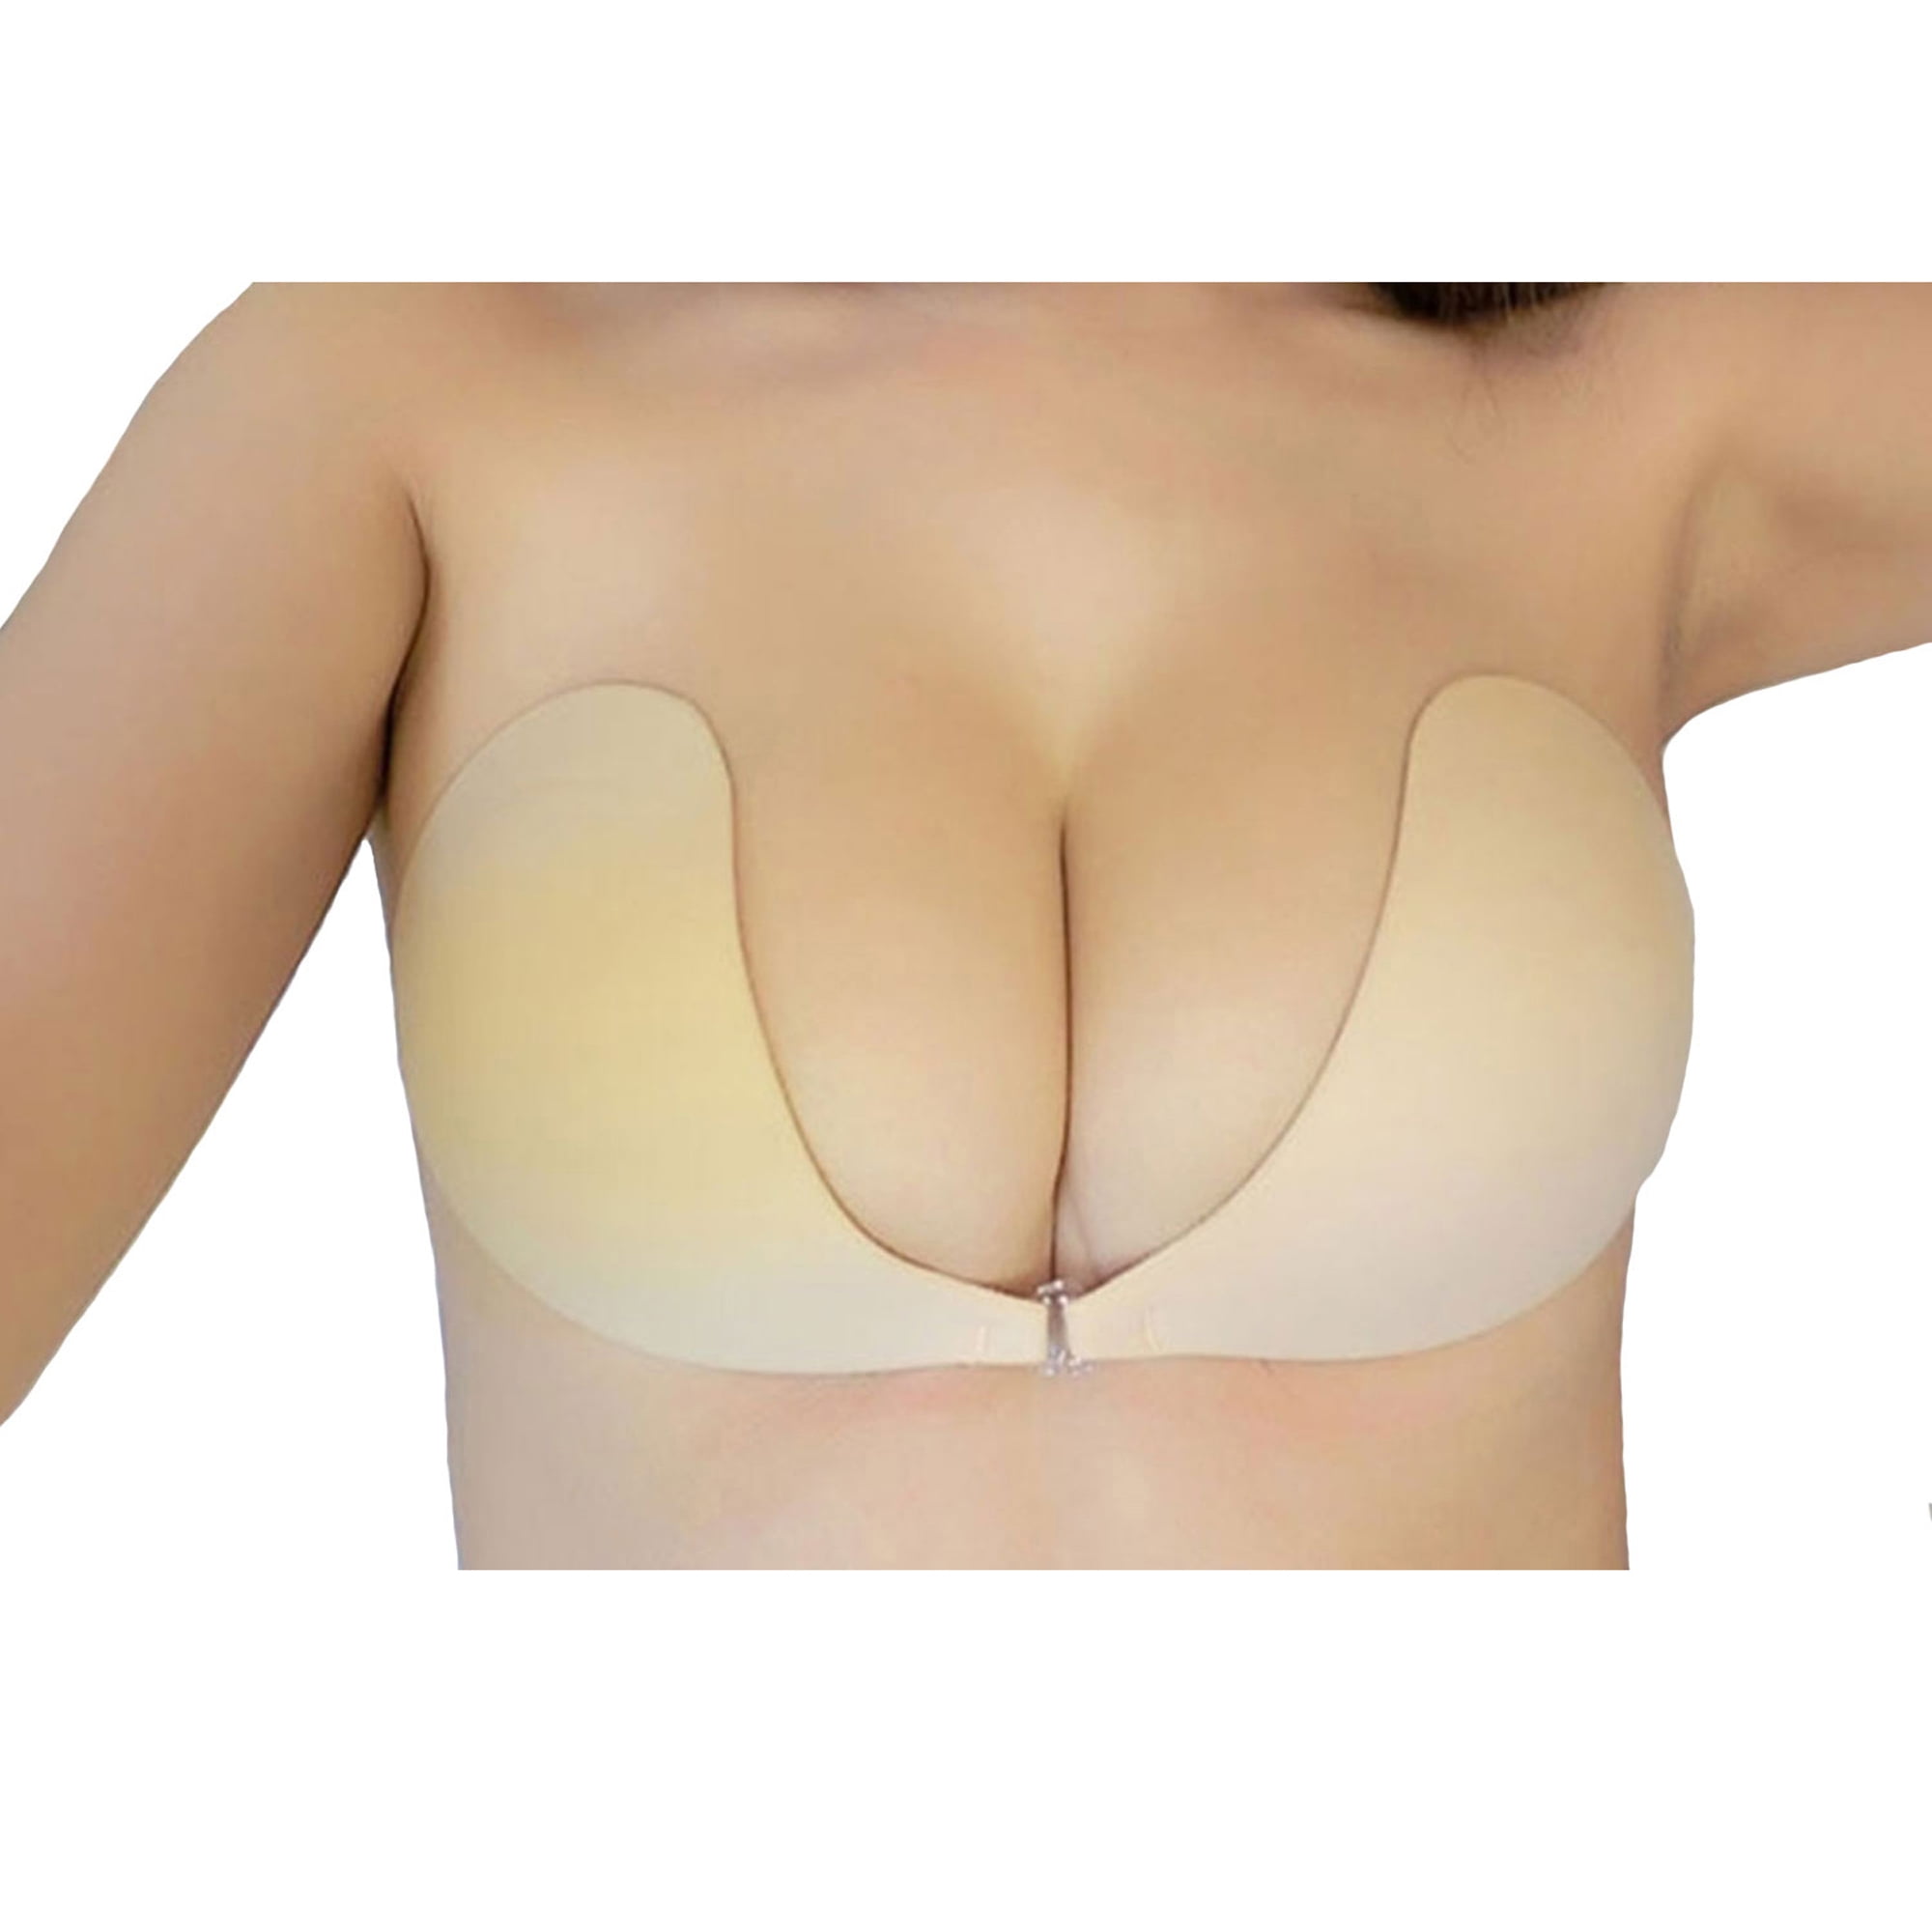 Womens Strapless Front Buckle Lift Bra Invisible Non-Slip Push Up Padded  Breast Lift Self Adhesive Underwear Lingerie